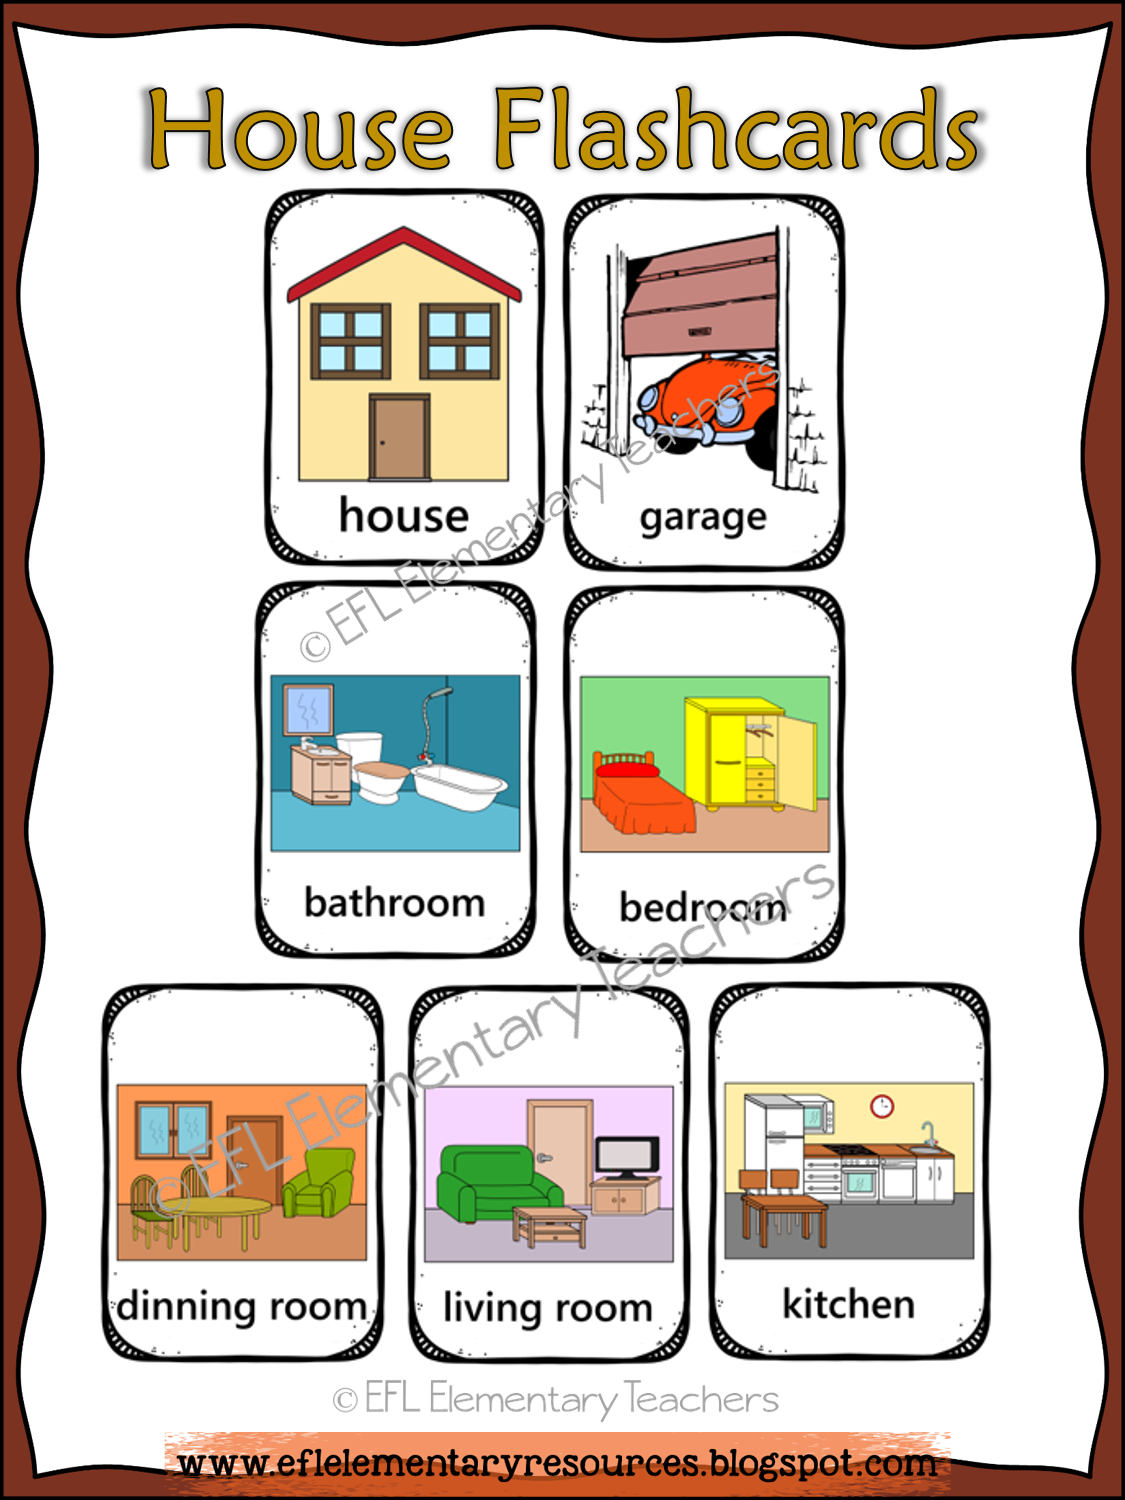 Rooms in the House карточки. Карточки на английском комнаты в доме. Комнаты Worksheets for Kids. Комнаты на английском для детей. My house is the street